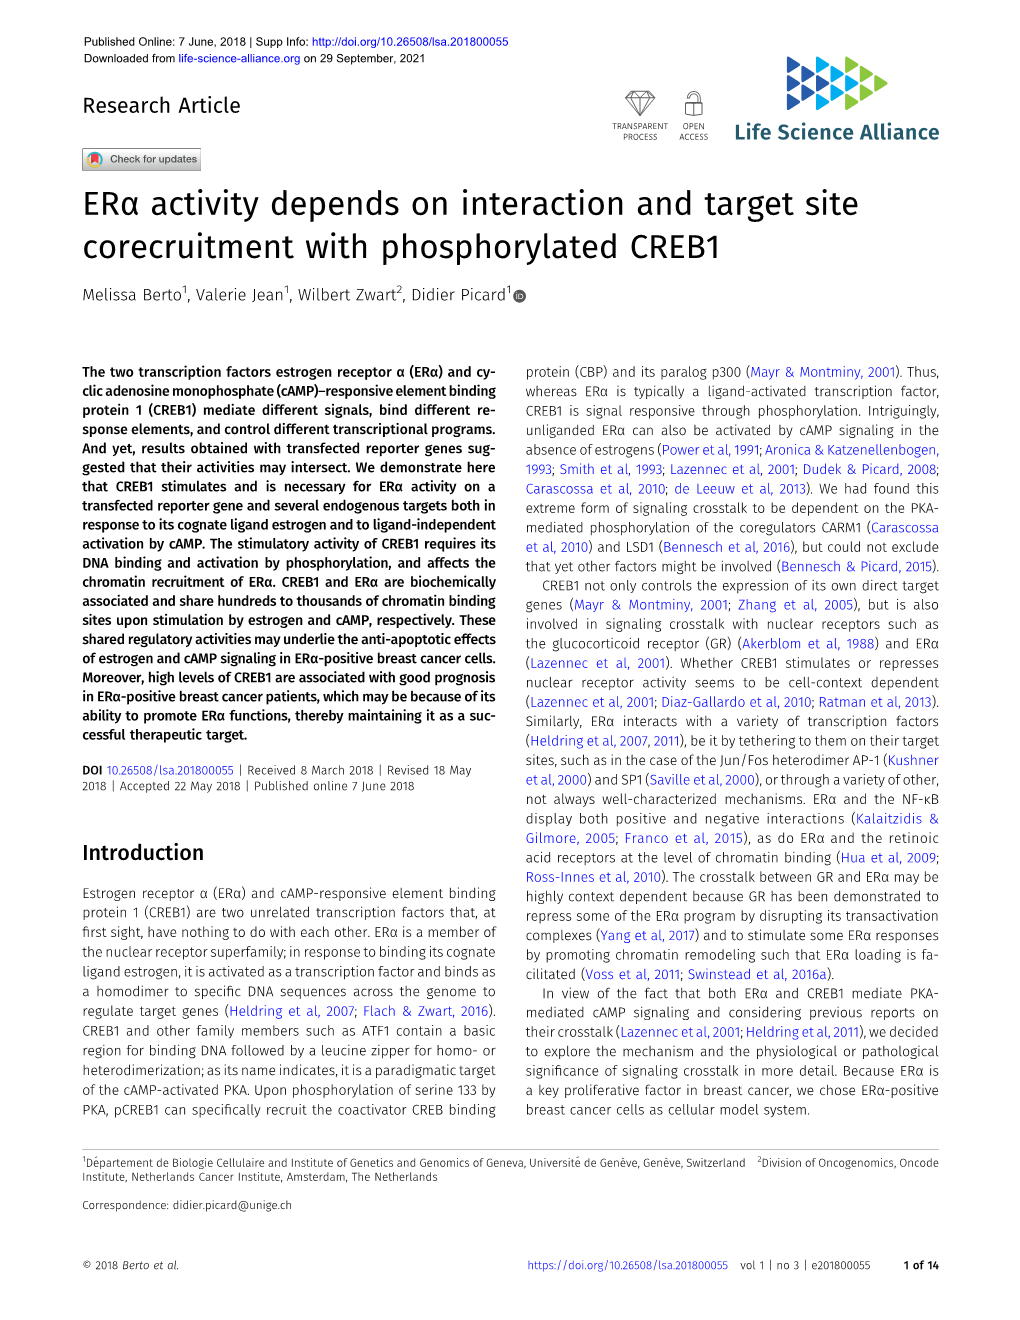 Erα Activity Depends on Interaction and Target Site Corecruitment with Phosphorylated CREB1